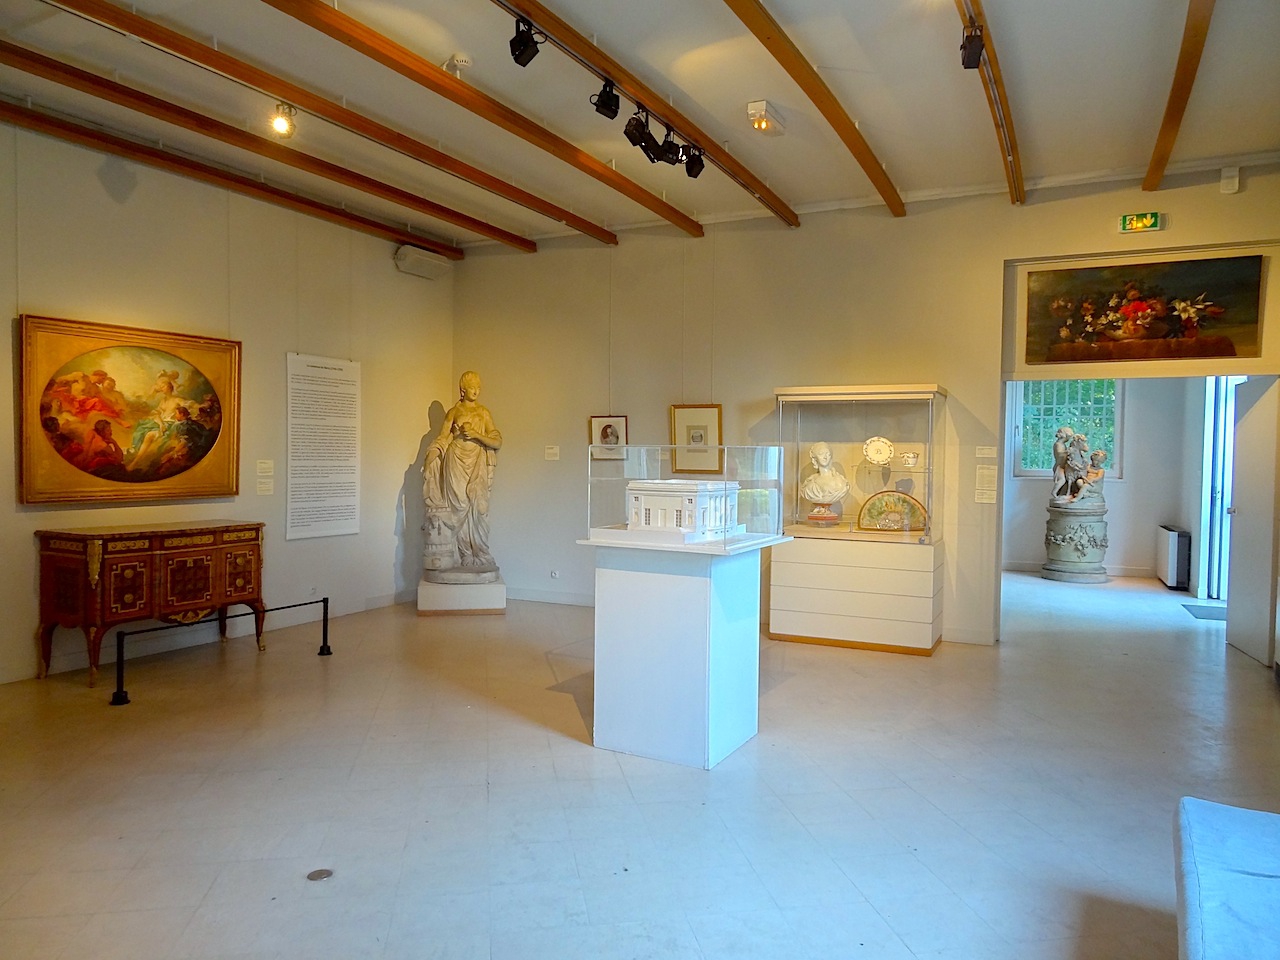 Marly-le-Roi musée salle 3